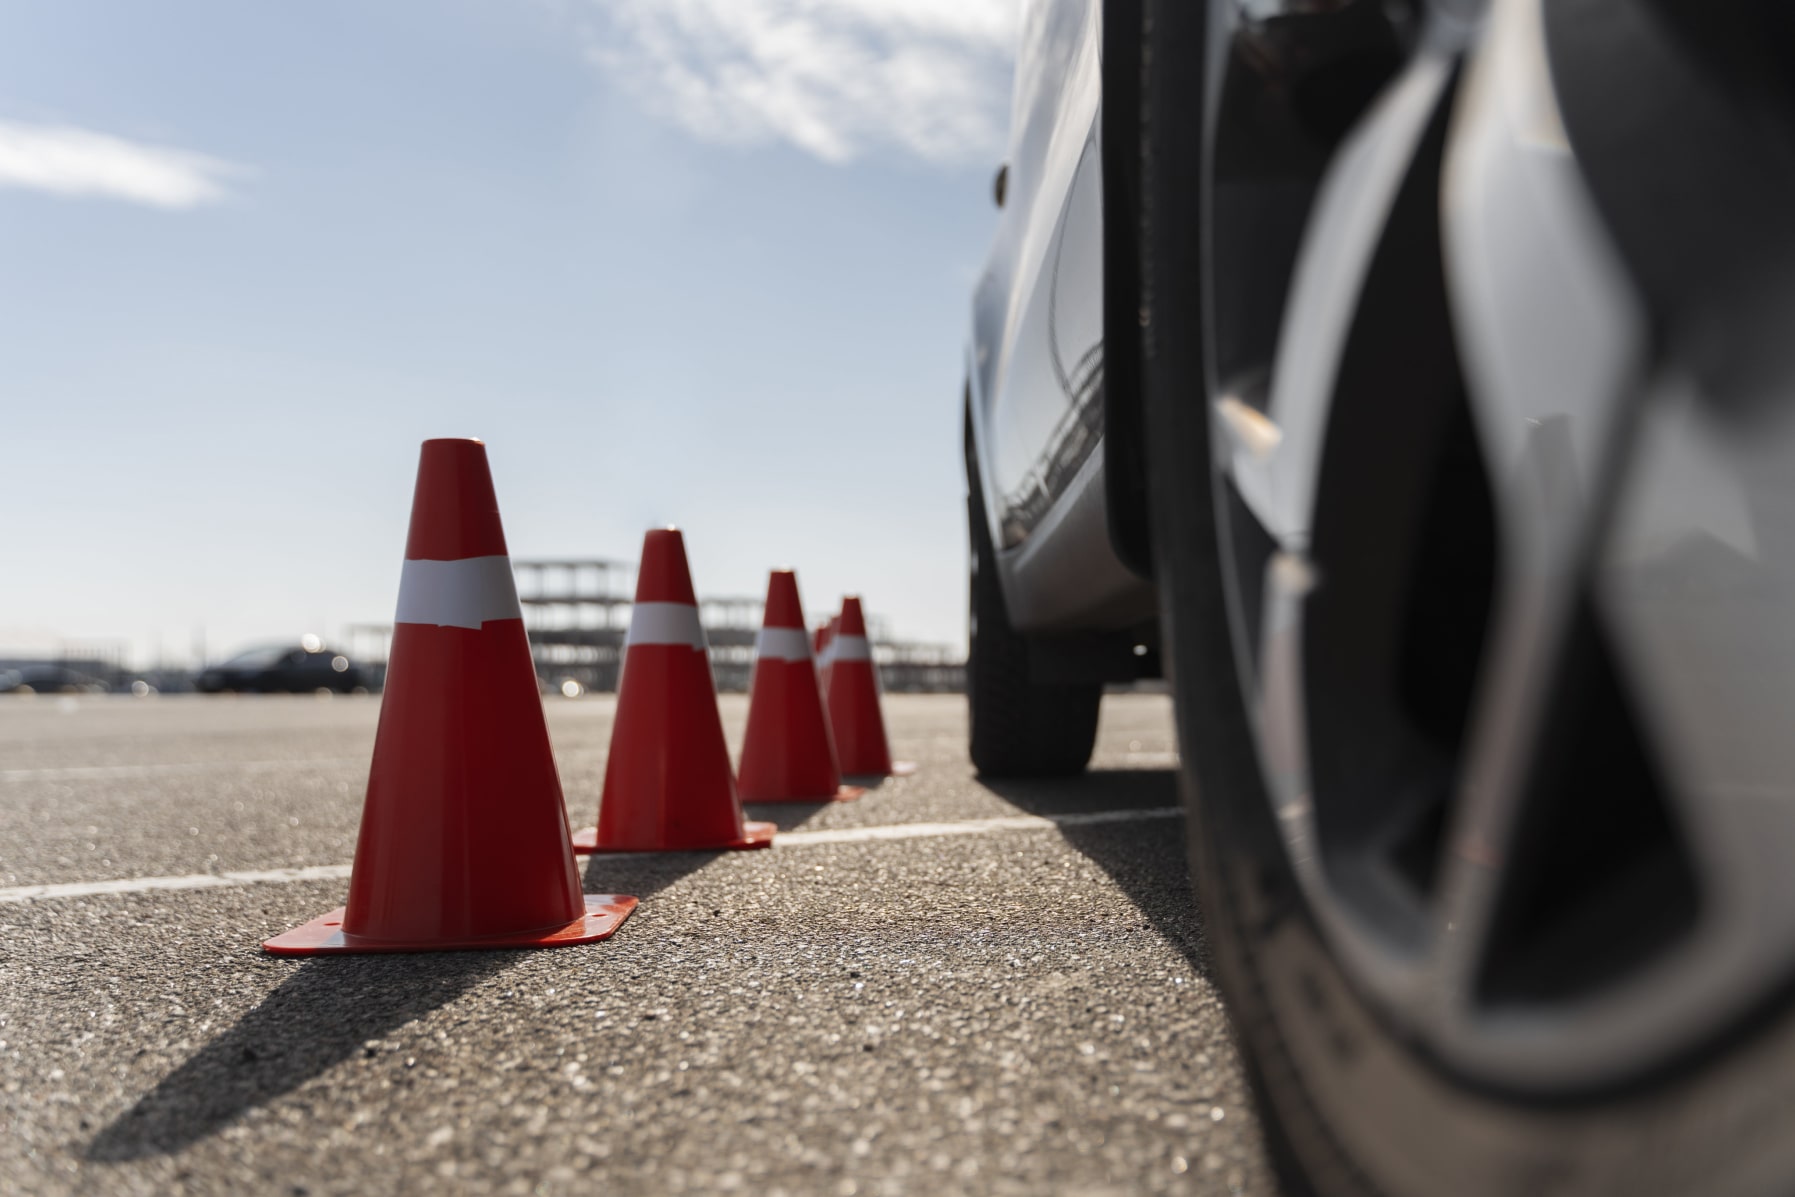 traffic_cones_and_car_for_driving_license_test min 1 min